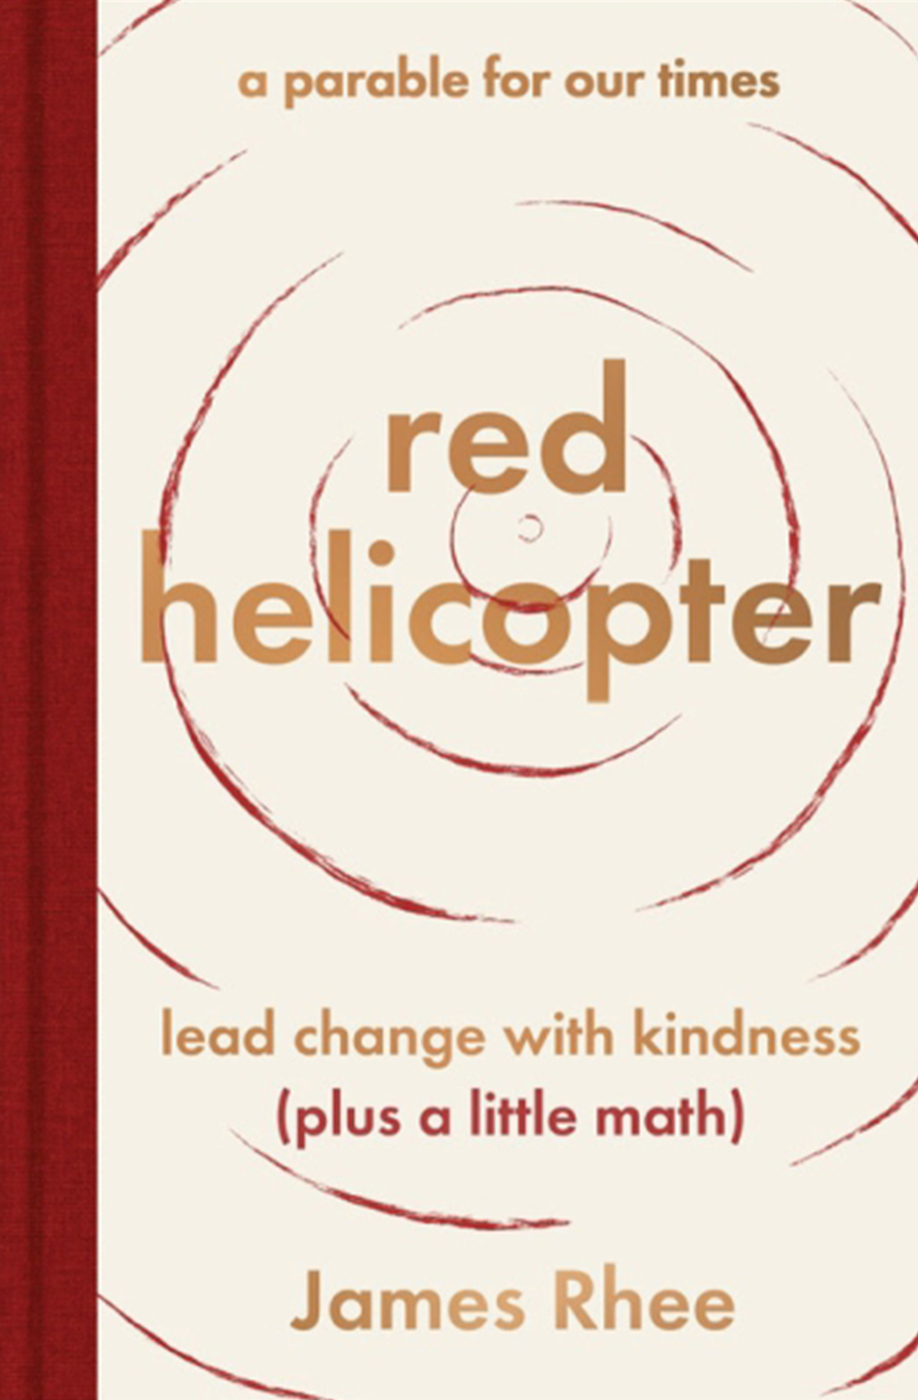 red helicopter-a parable for our times: lead change with kindness (plus a little math) by James Rhee book cover